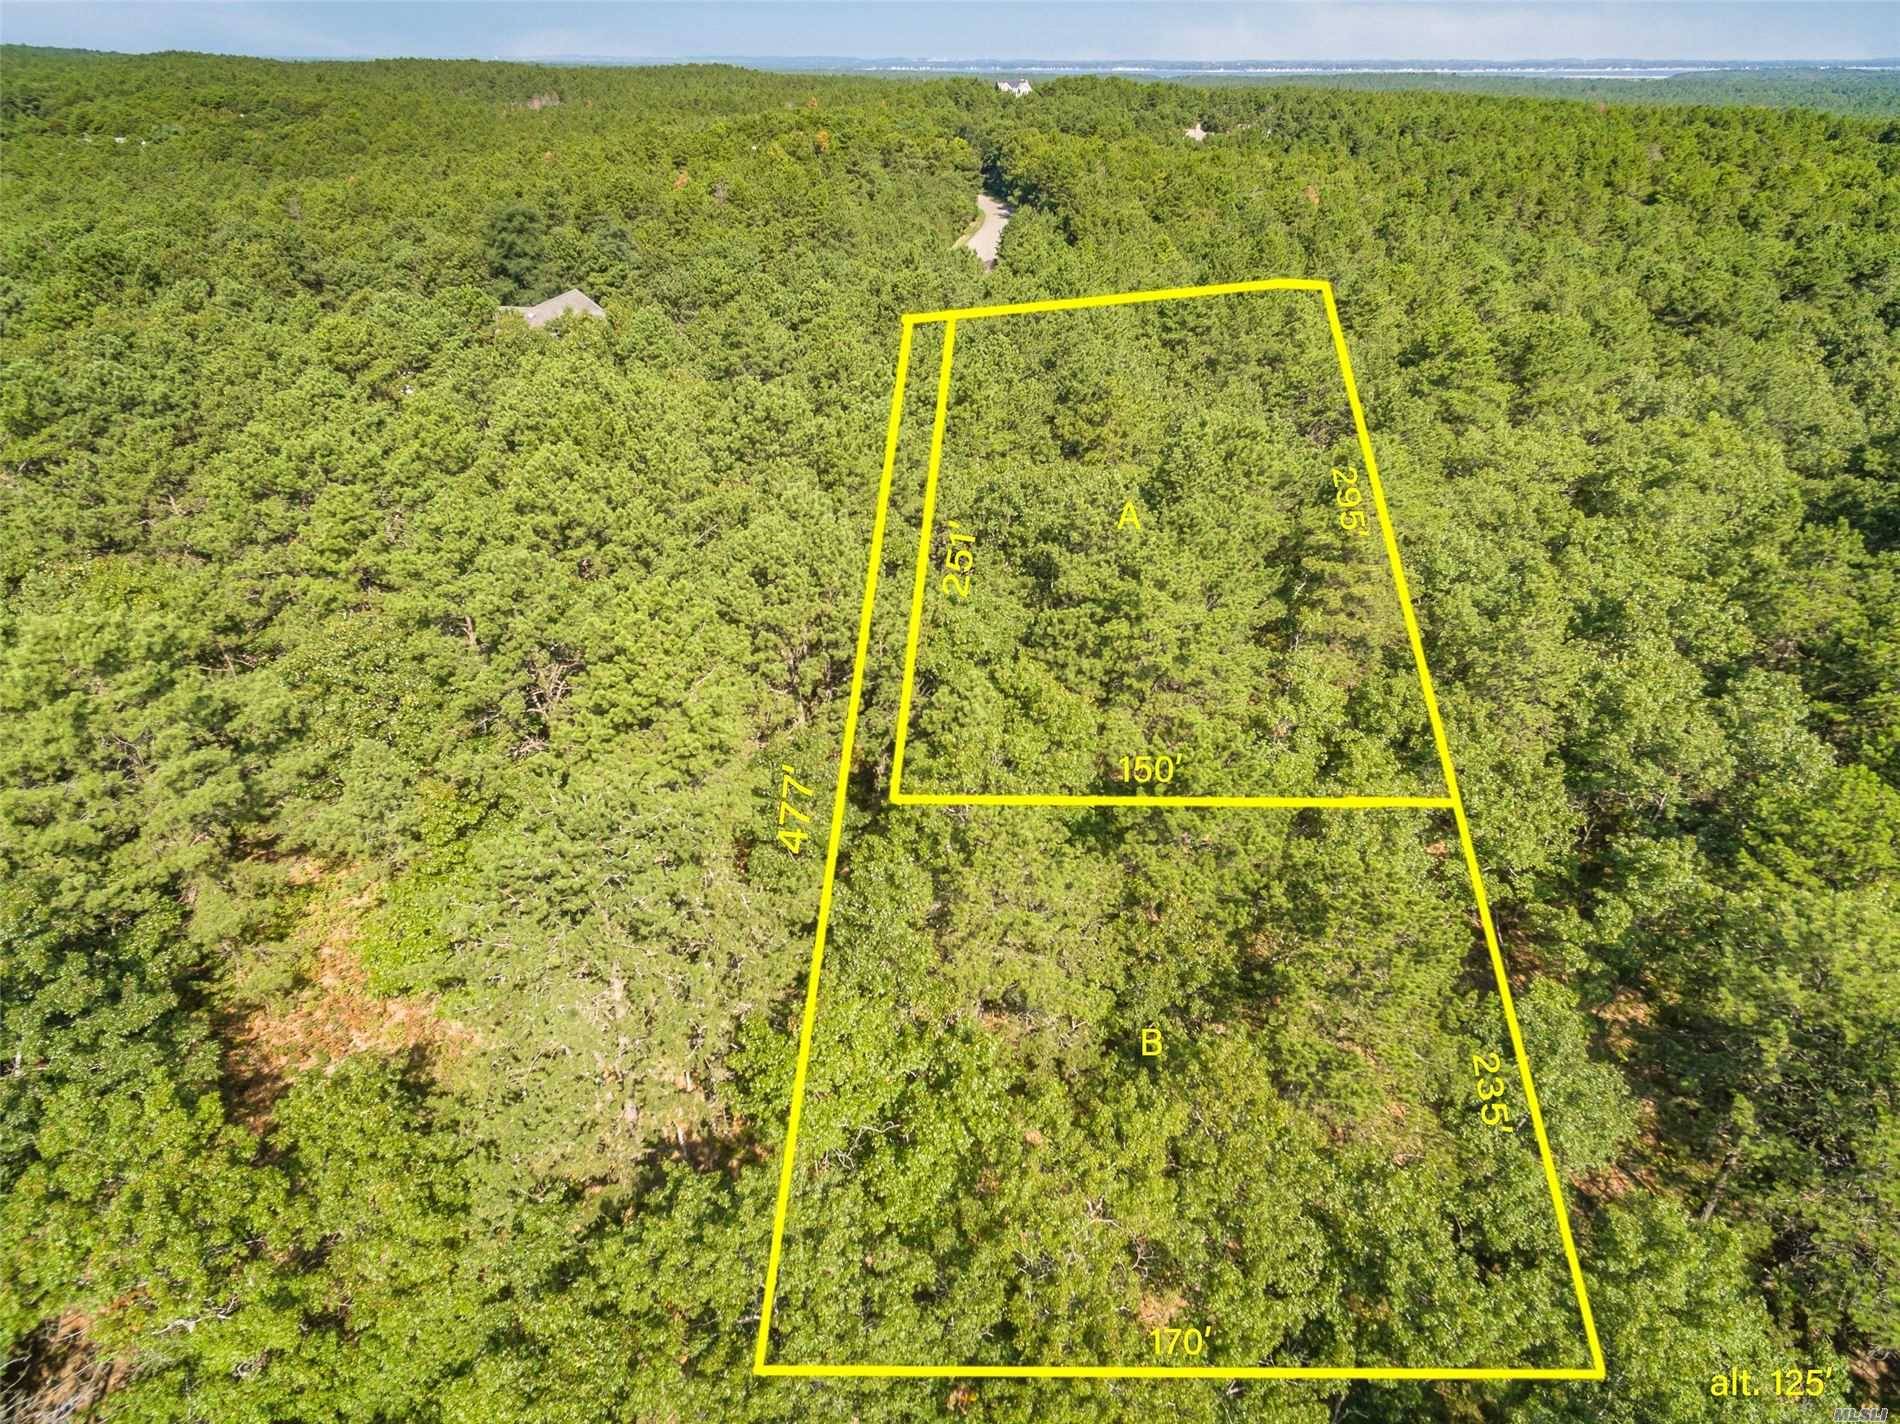 SOUTHAMPTON PINES BEAUTIFUL WOODED ACRE FLAG LOT ADJOINING A 16 ACRE PRESERVE ON OF THE HIGHEST POINTS IN SOUTHAMPTON PINES.